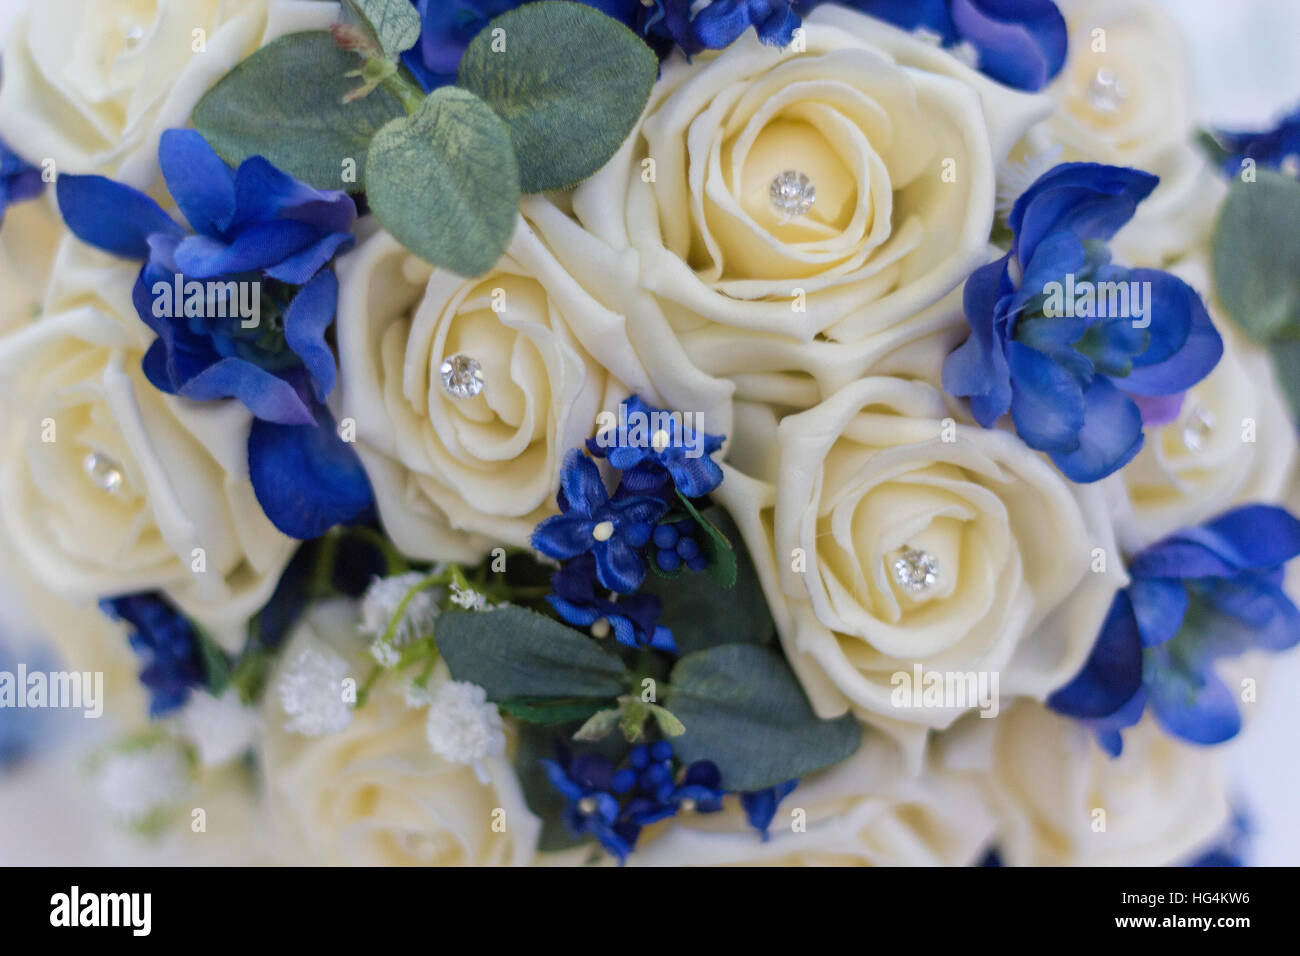 Wedding bouquet in blue and white with roses and diamantes Stock Photo